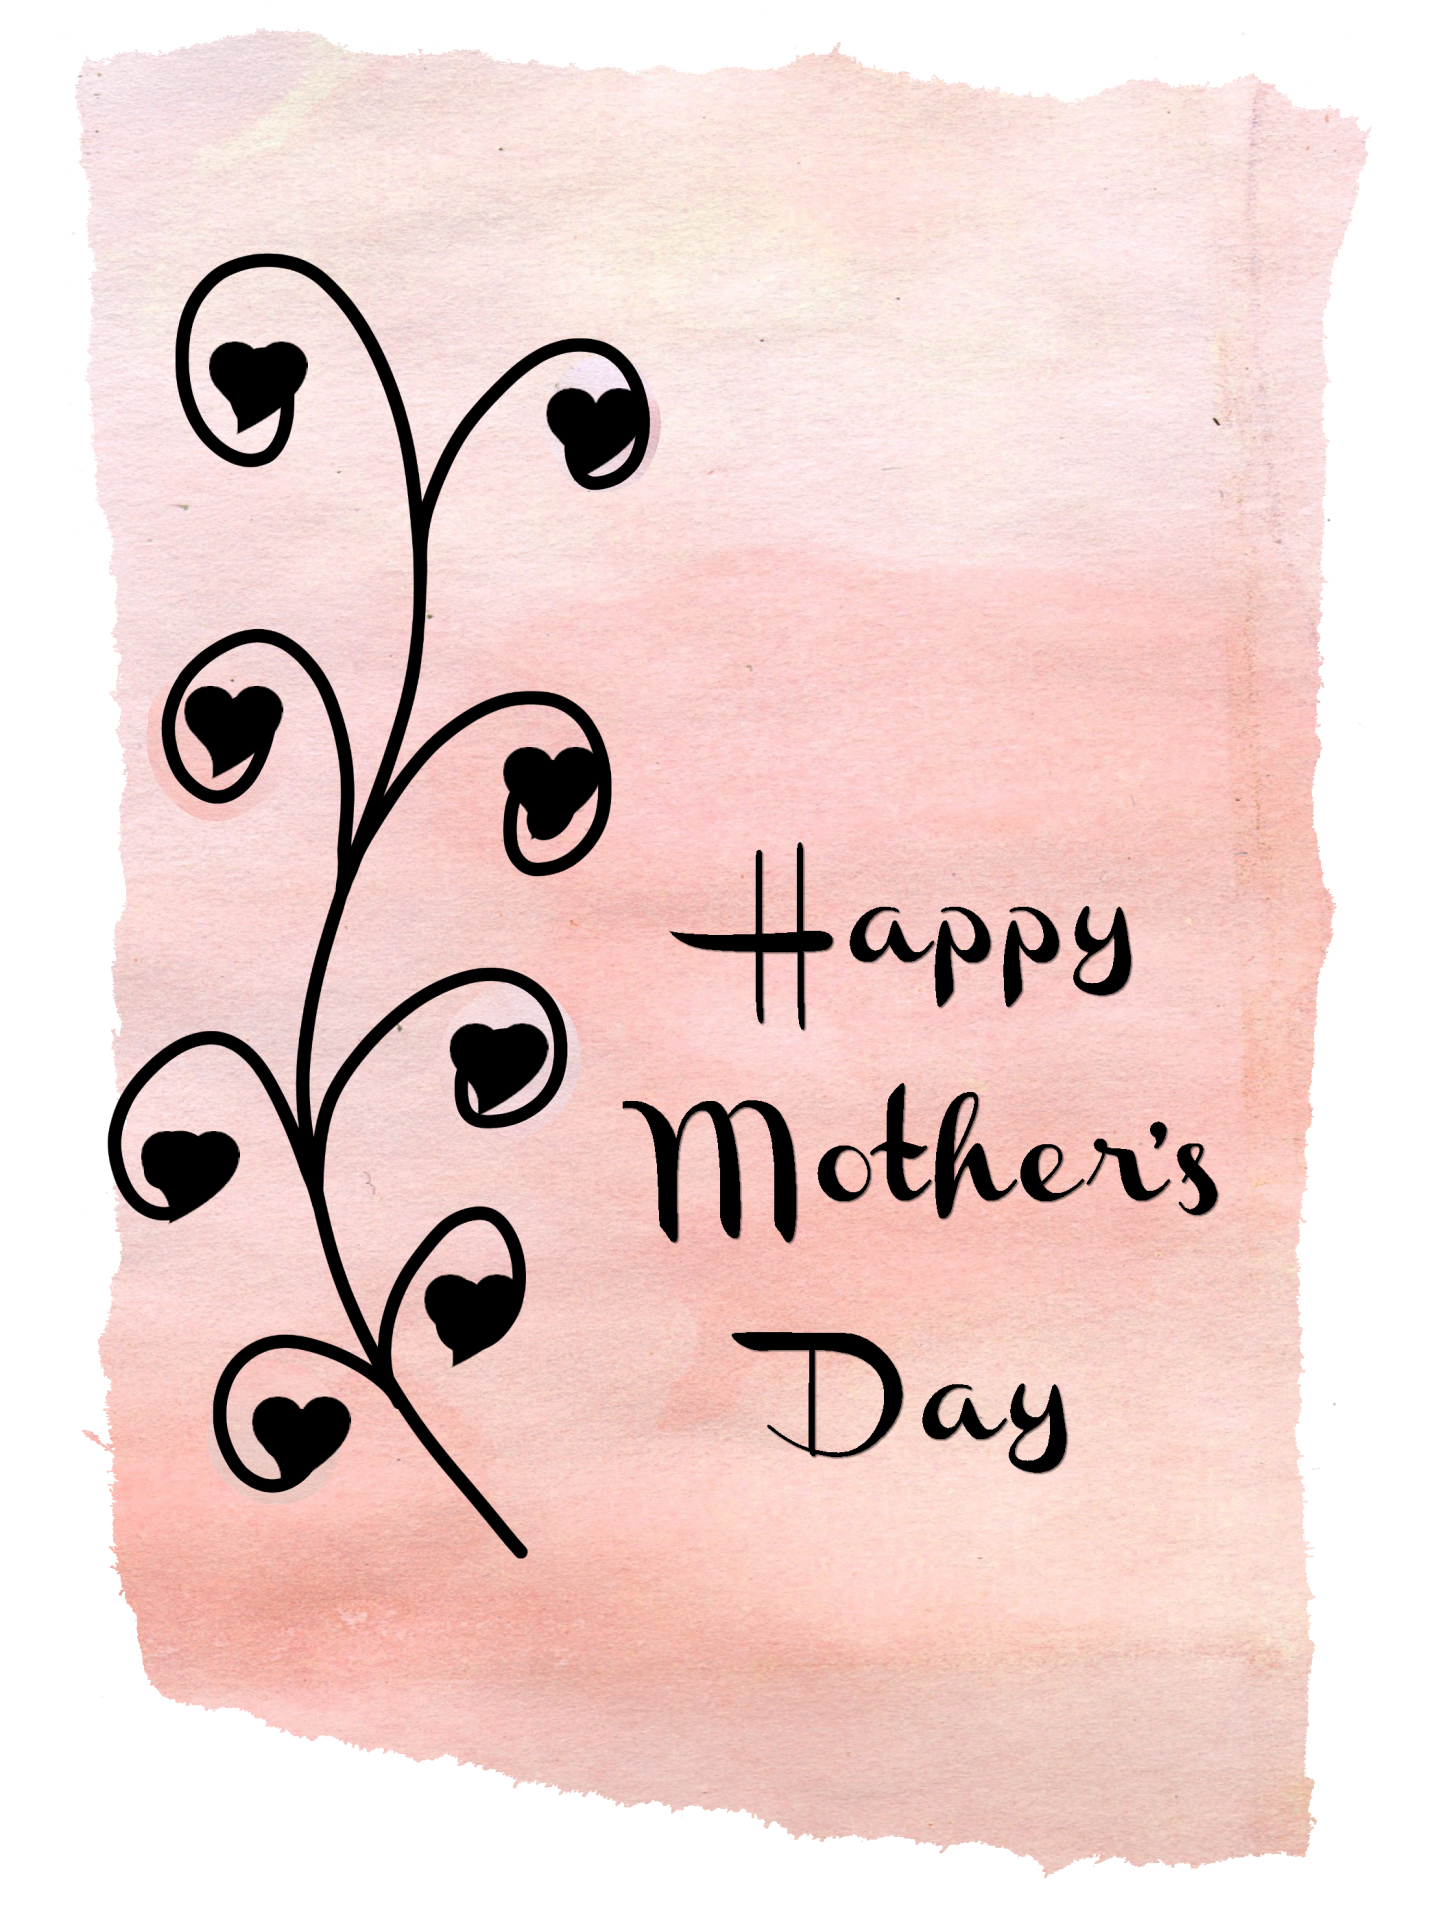 happy-mother-s-day-2020-6-free-stock-photo-public-domain-pictures